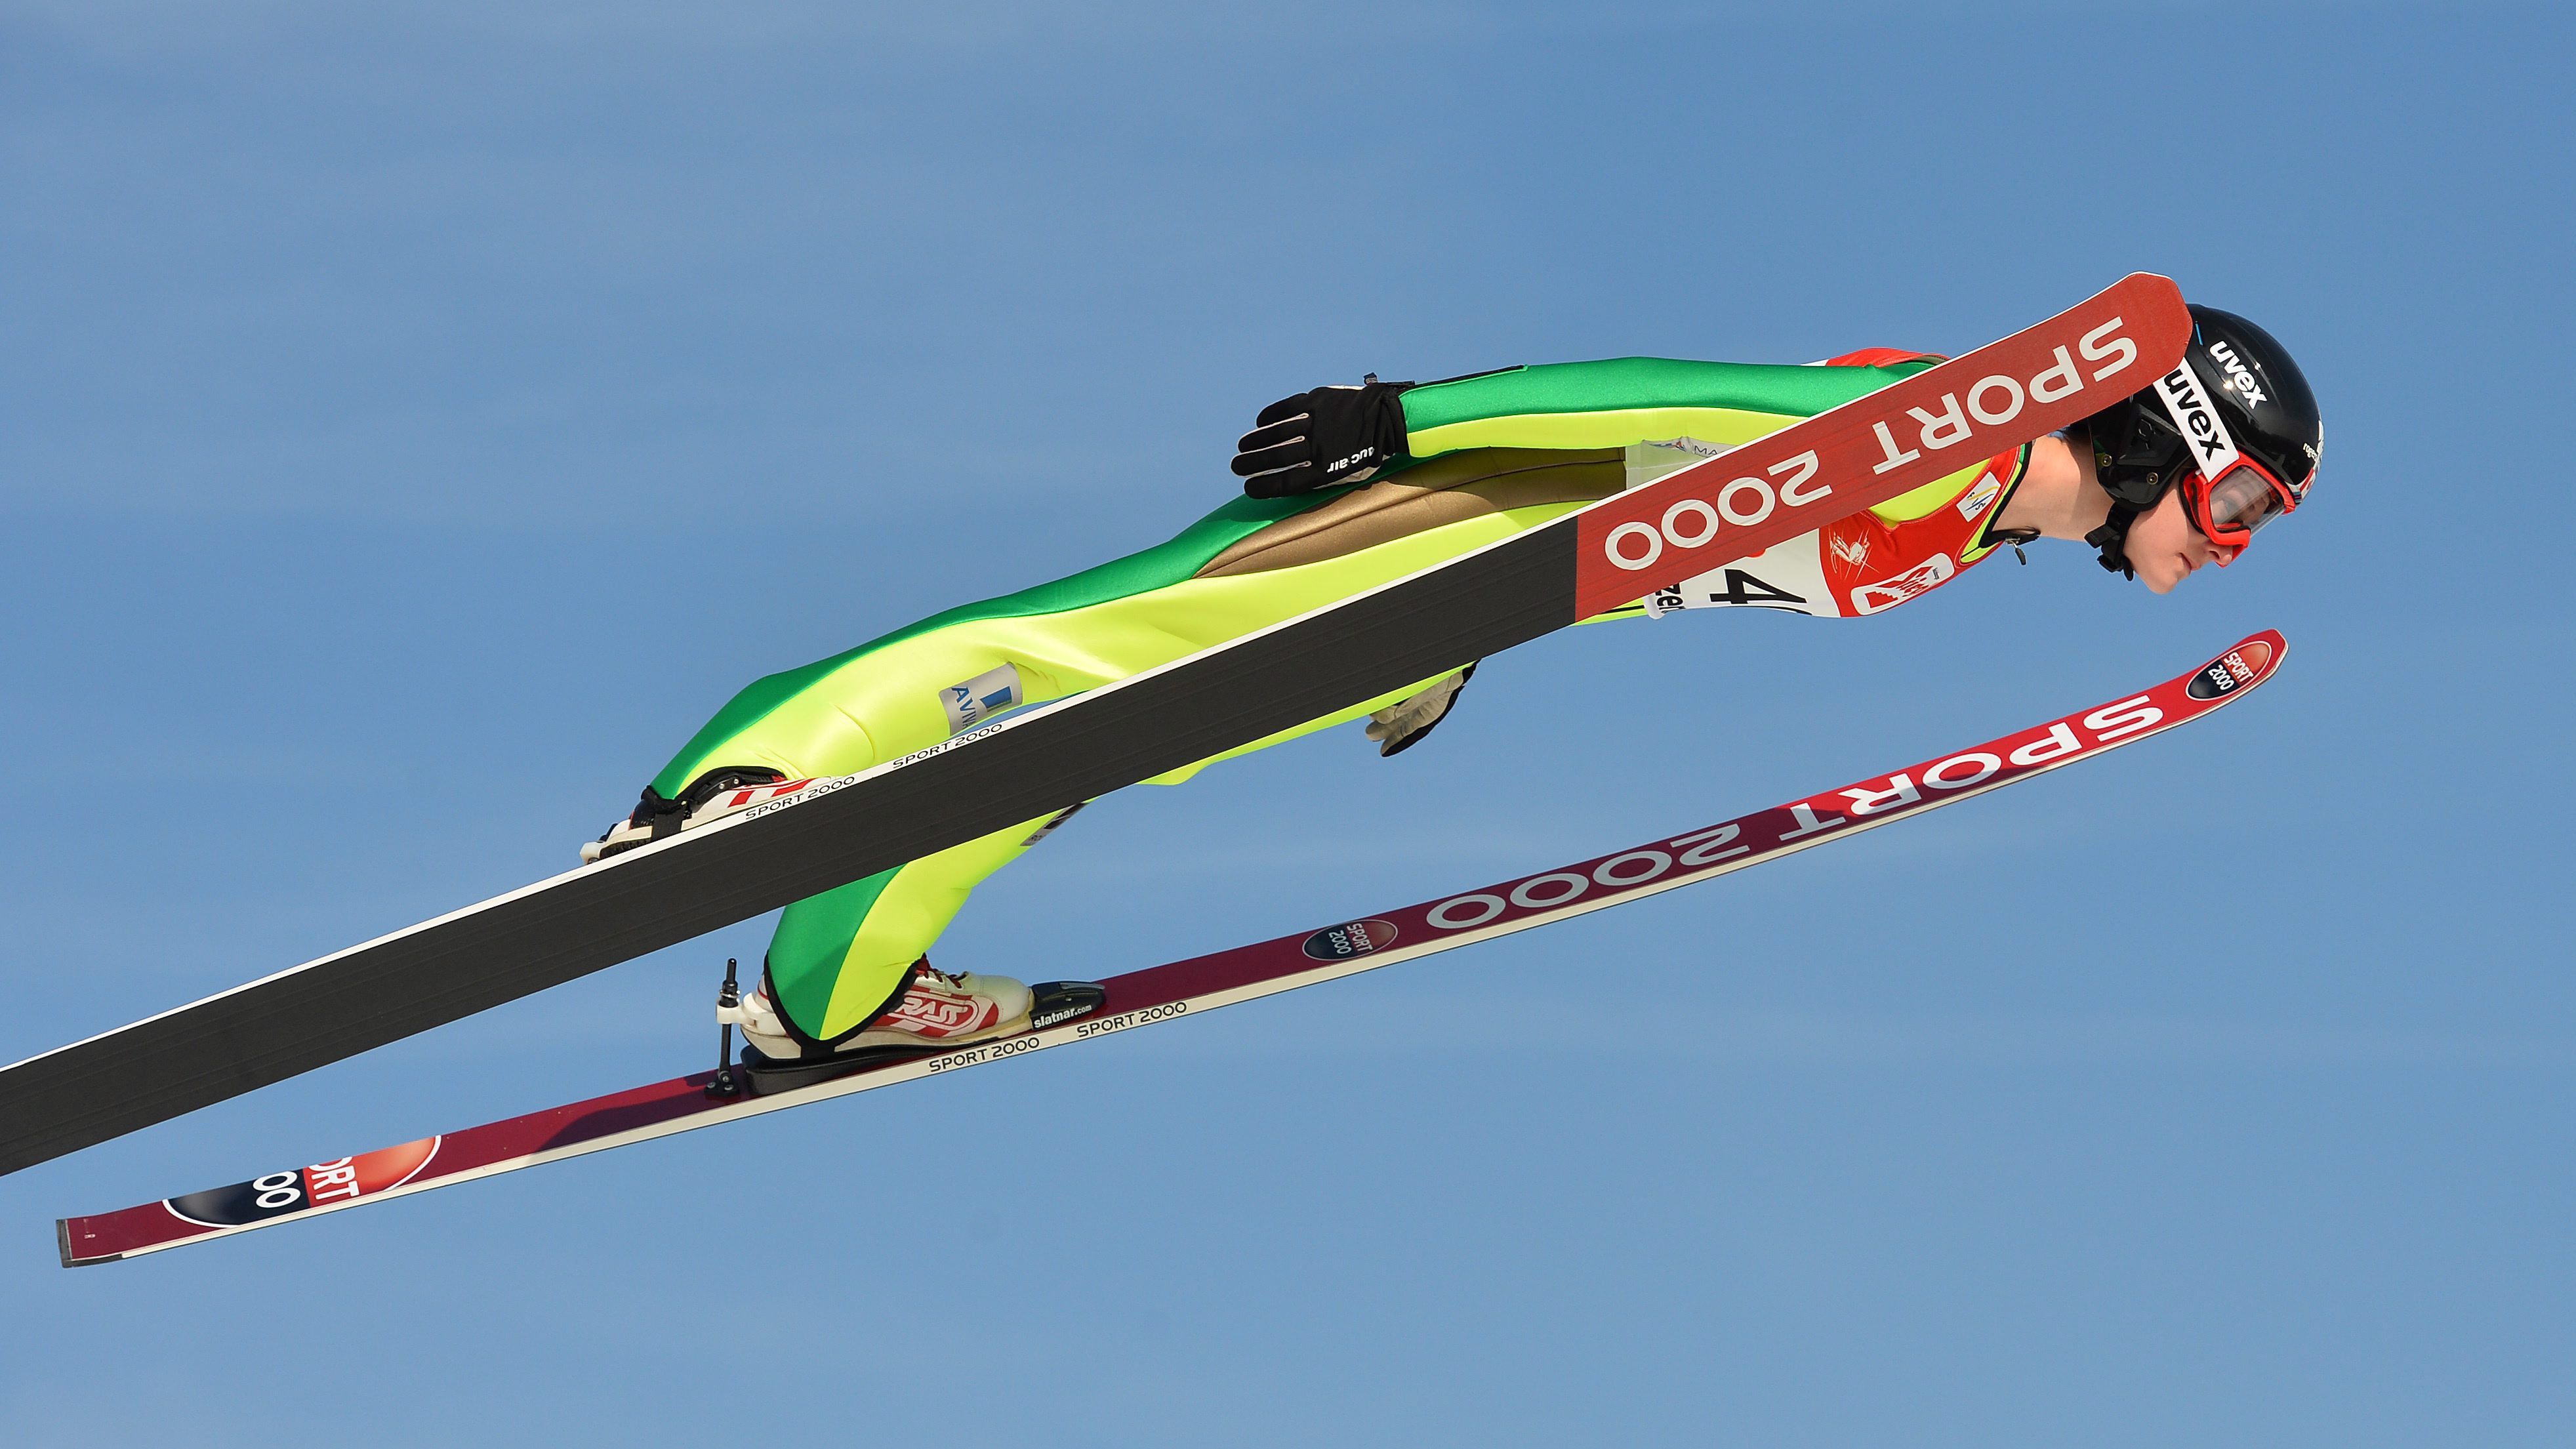 Canada's Taylor Henrich competes during her qualification jump of the Ski Jumping Ladies World Cup in Hinzenbach, Austria, on Sunday, Feb. 7, 2016. (AP Photo/Kerstin Joensson)